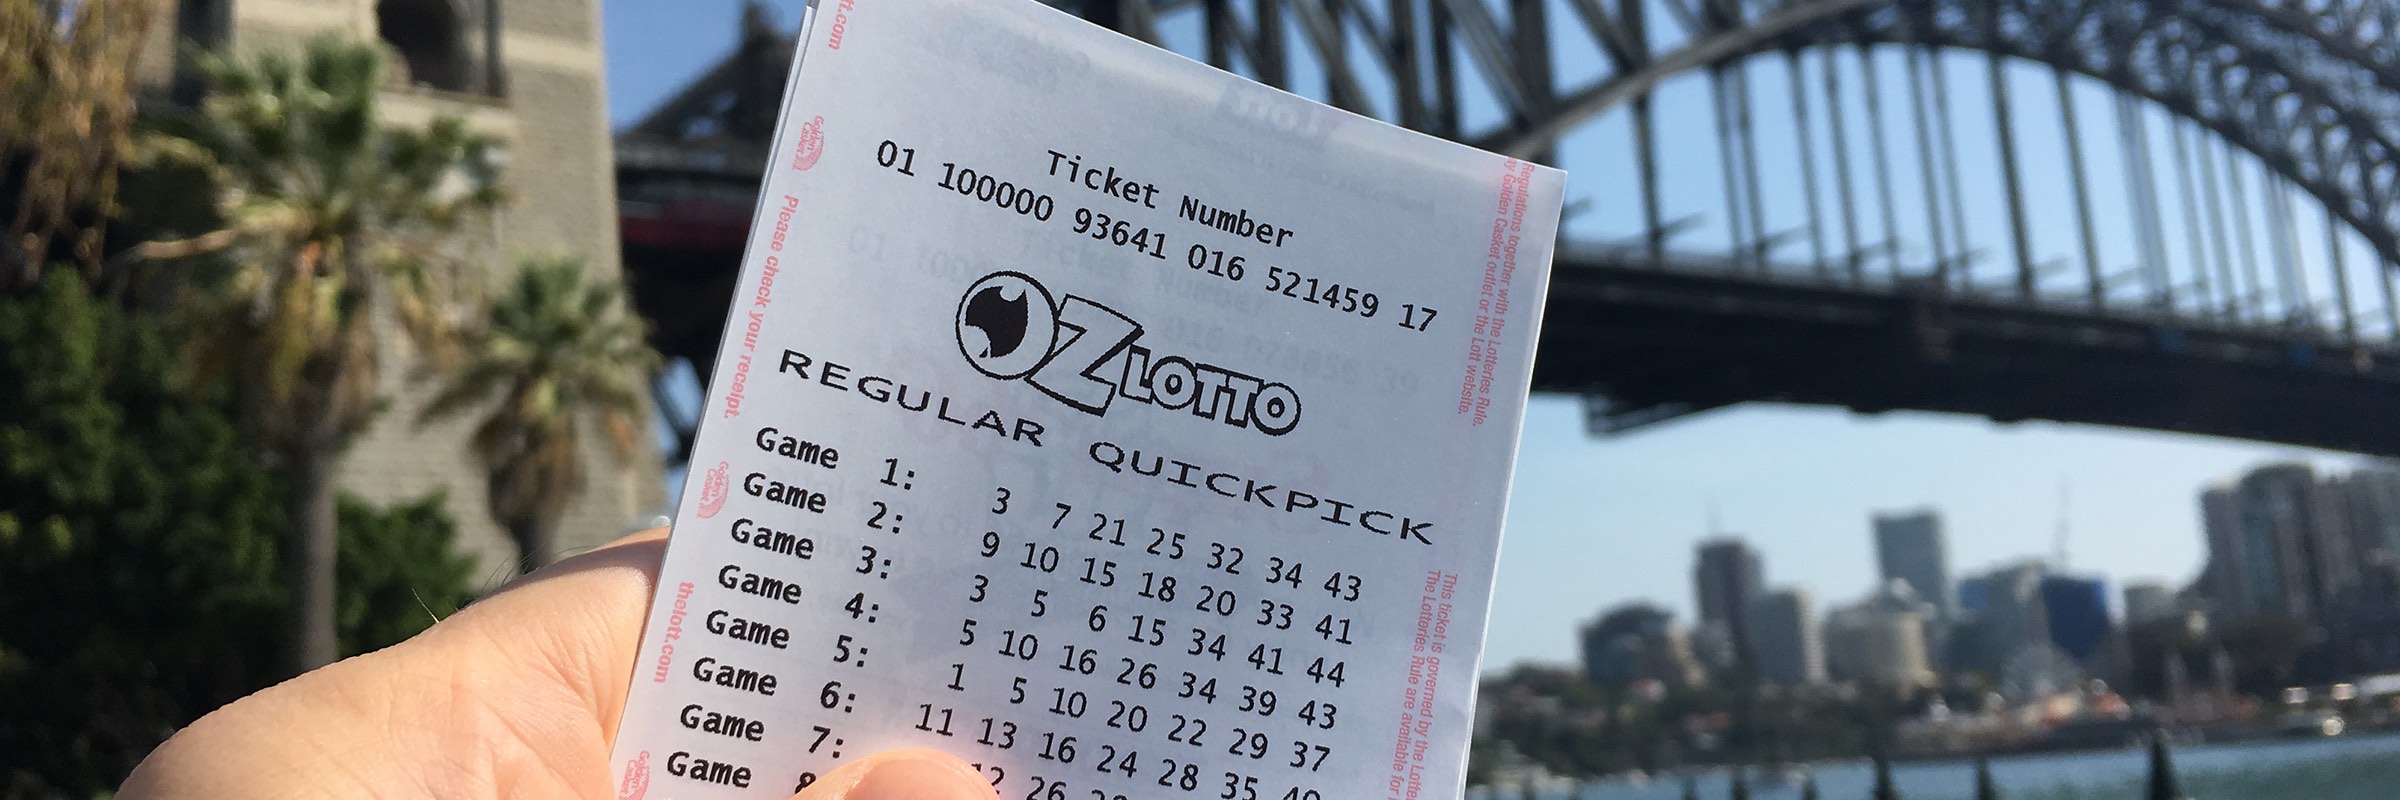 lotto numbers feb 16 2019